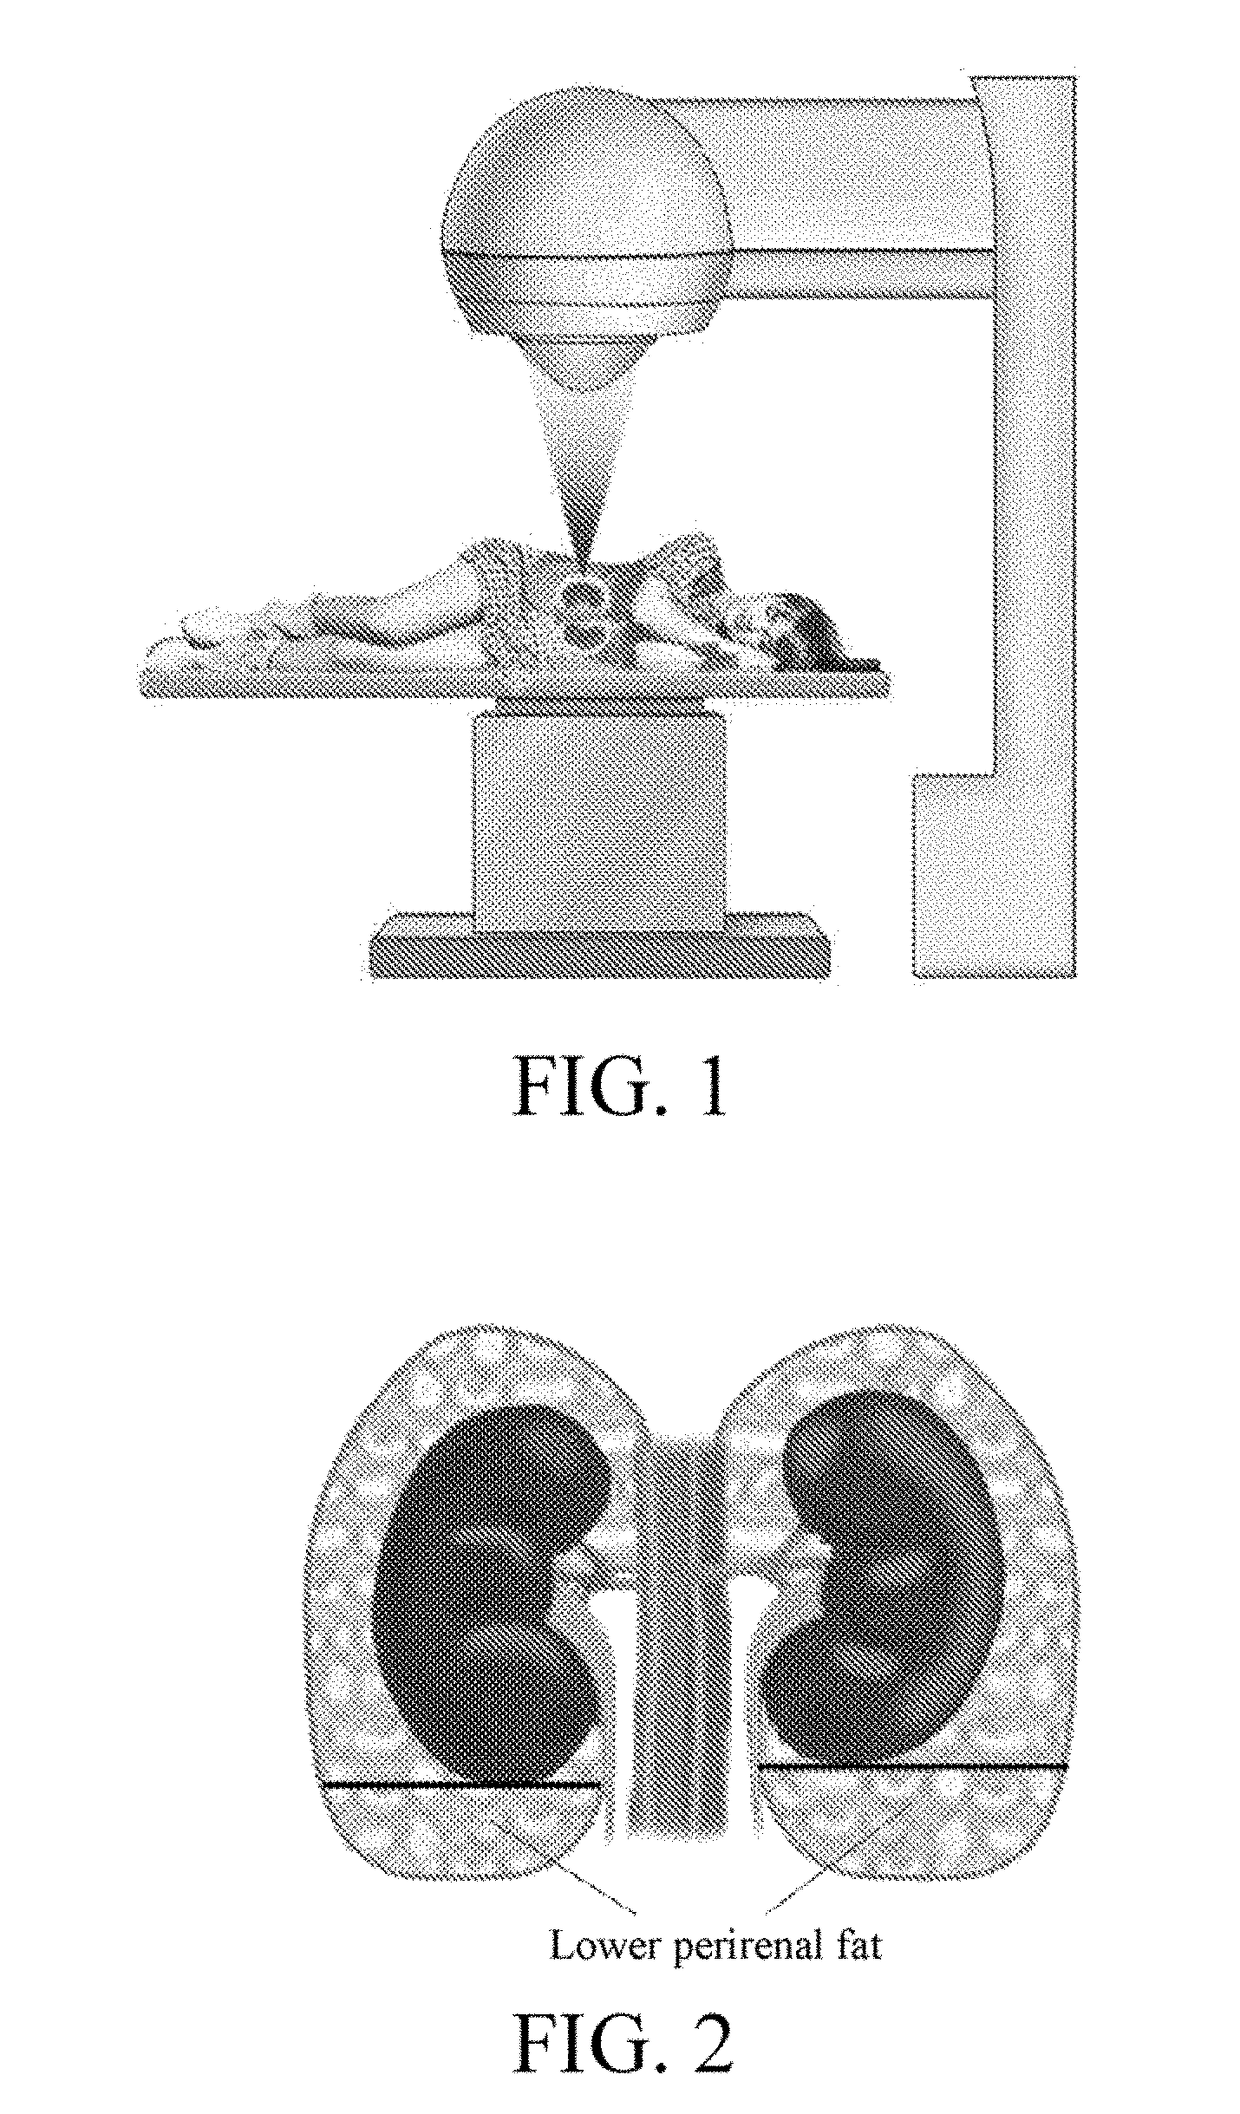 Application of high-intensity focused ultrasound system to treatment of essential hypertension